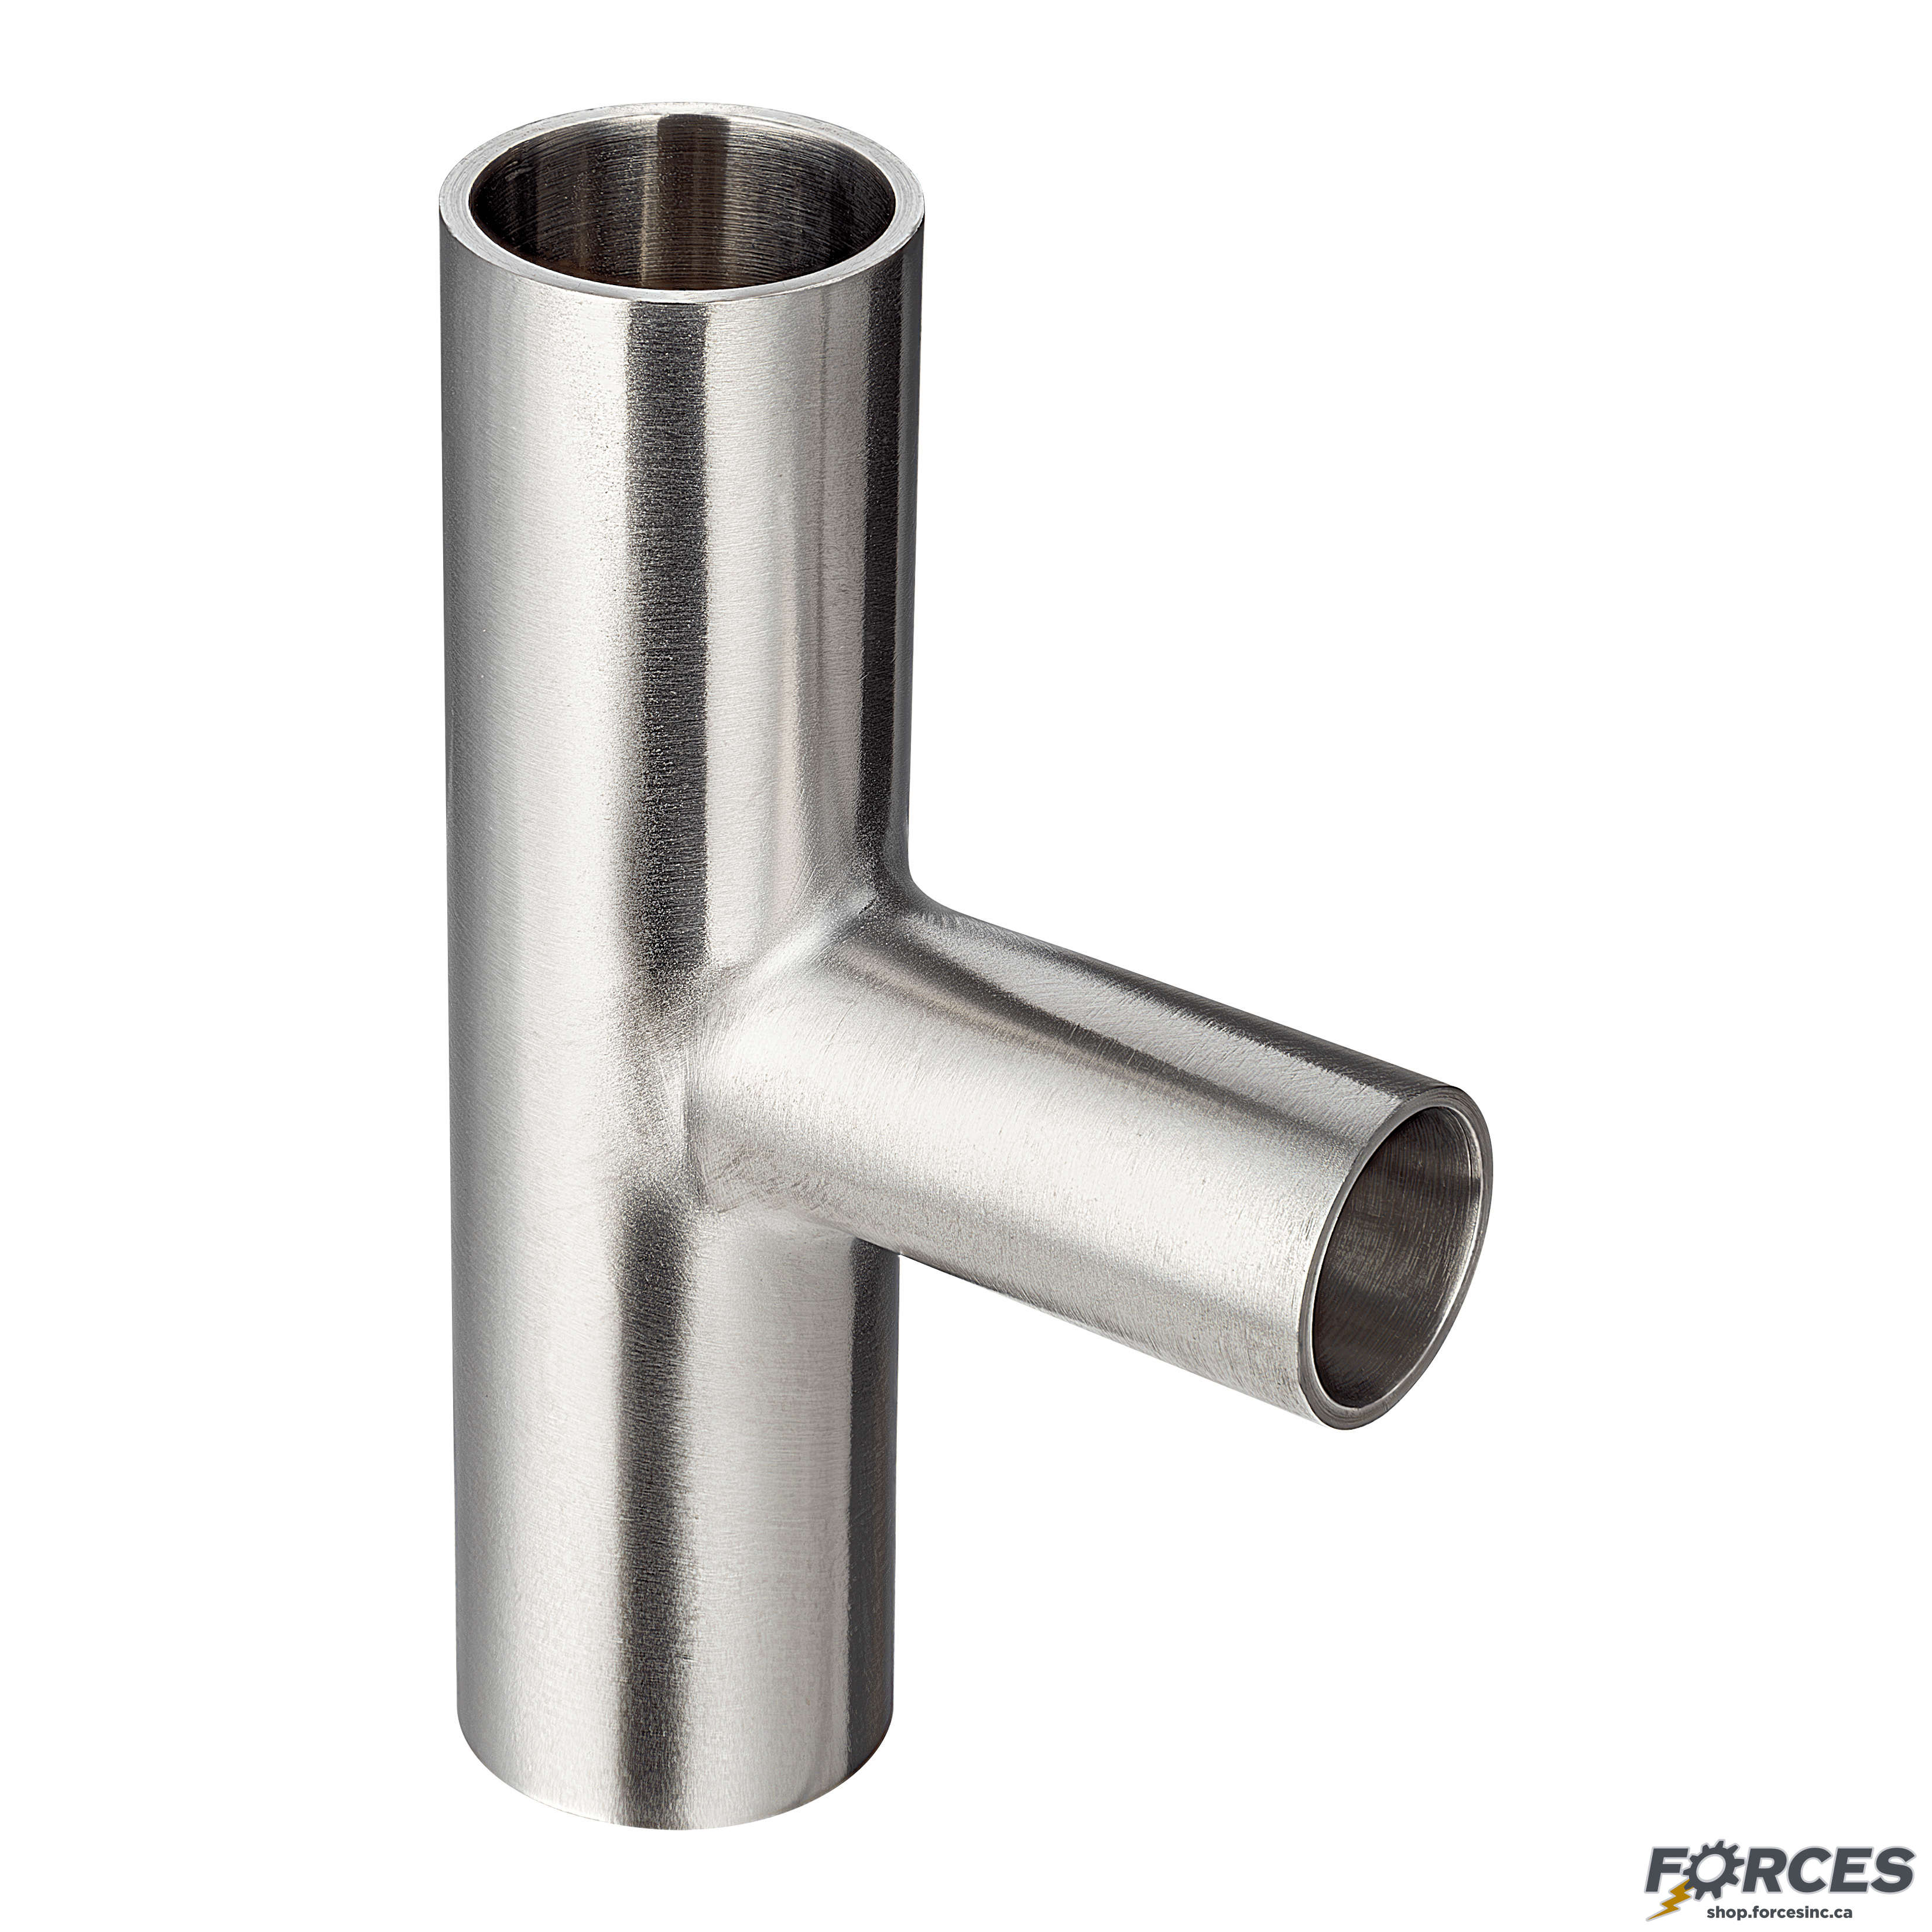 4" x 1" Butt Weld Tee Reducer - Stainless Steel 304 - Forces Inc